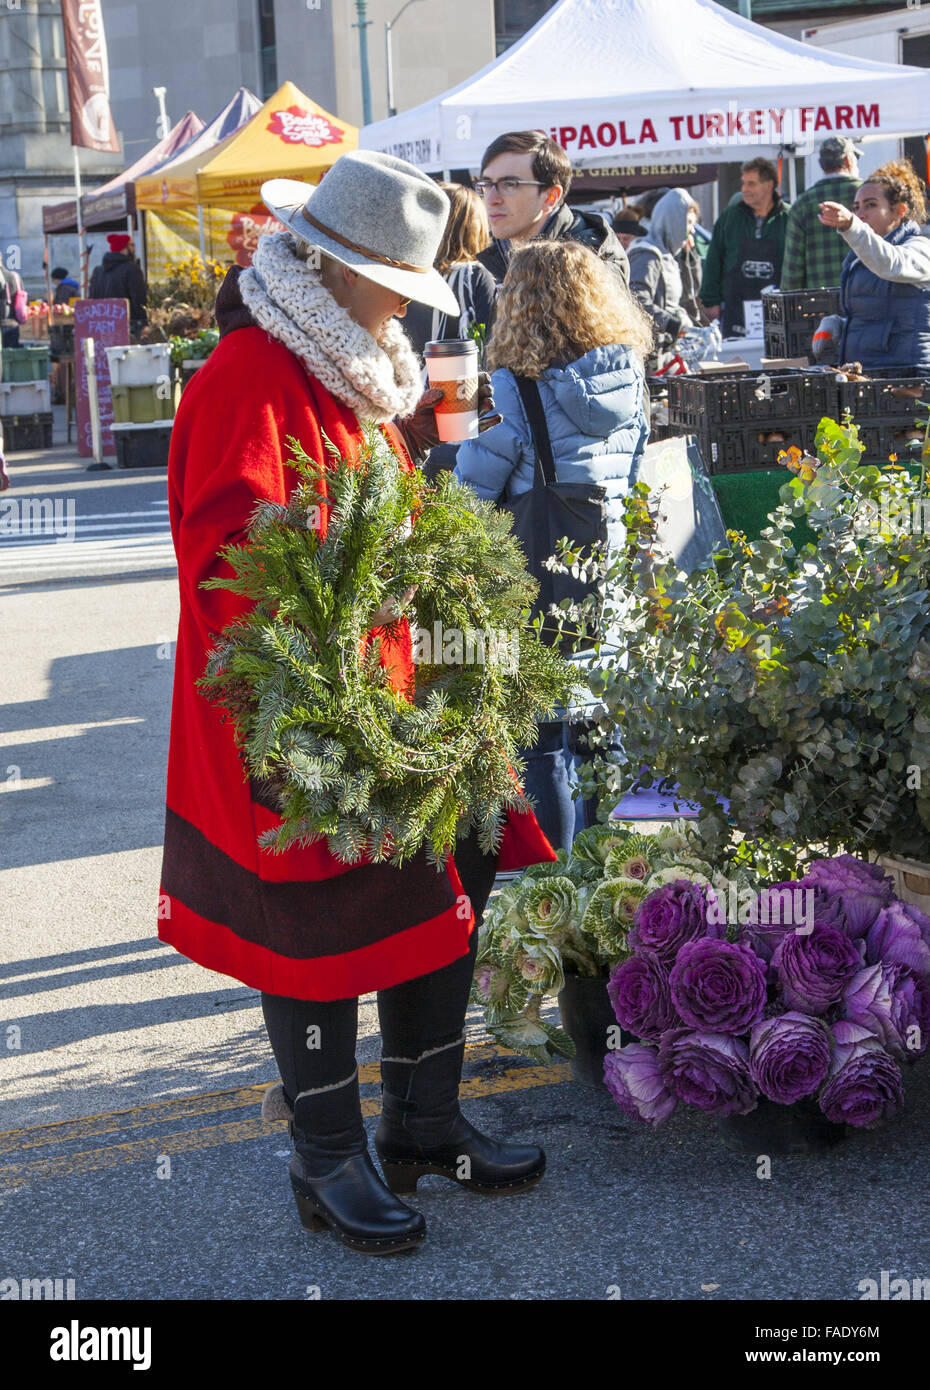 Woman buying a Christmas Wreath at the Grand Army Plaza Farmers Market in Park Slope, Brooklyn, NY Stock Photo